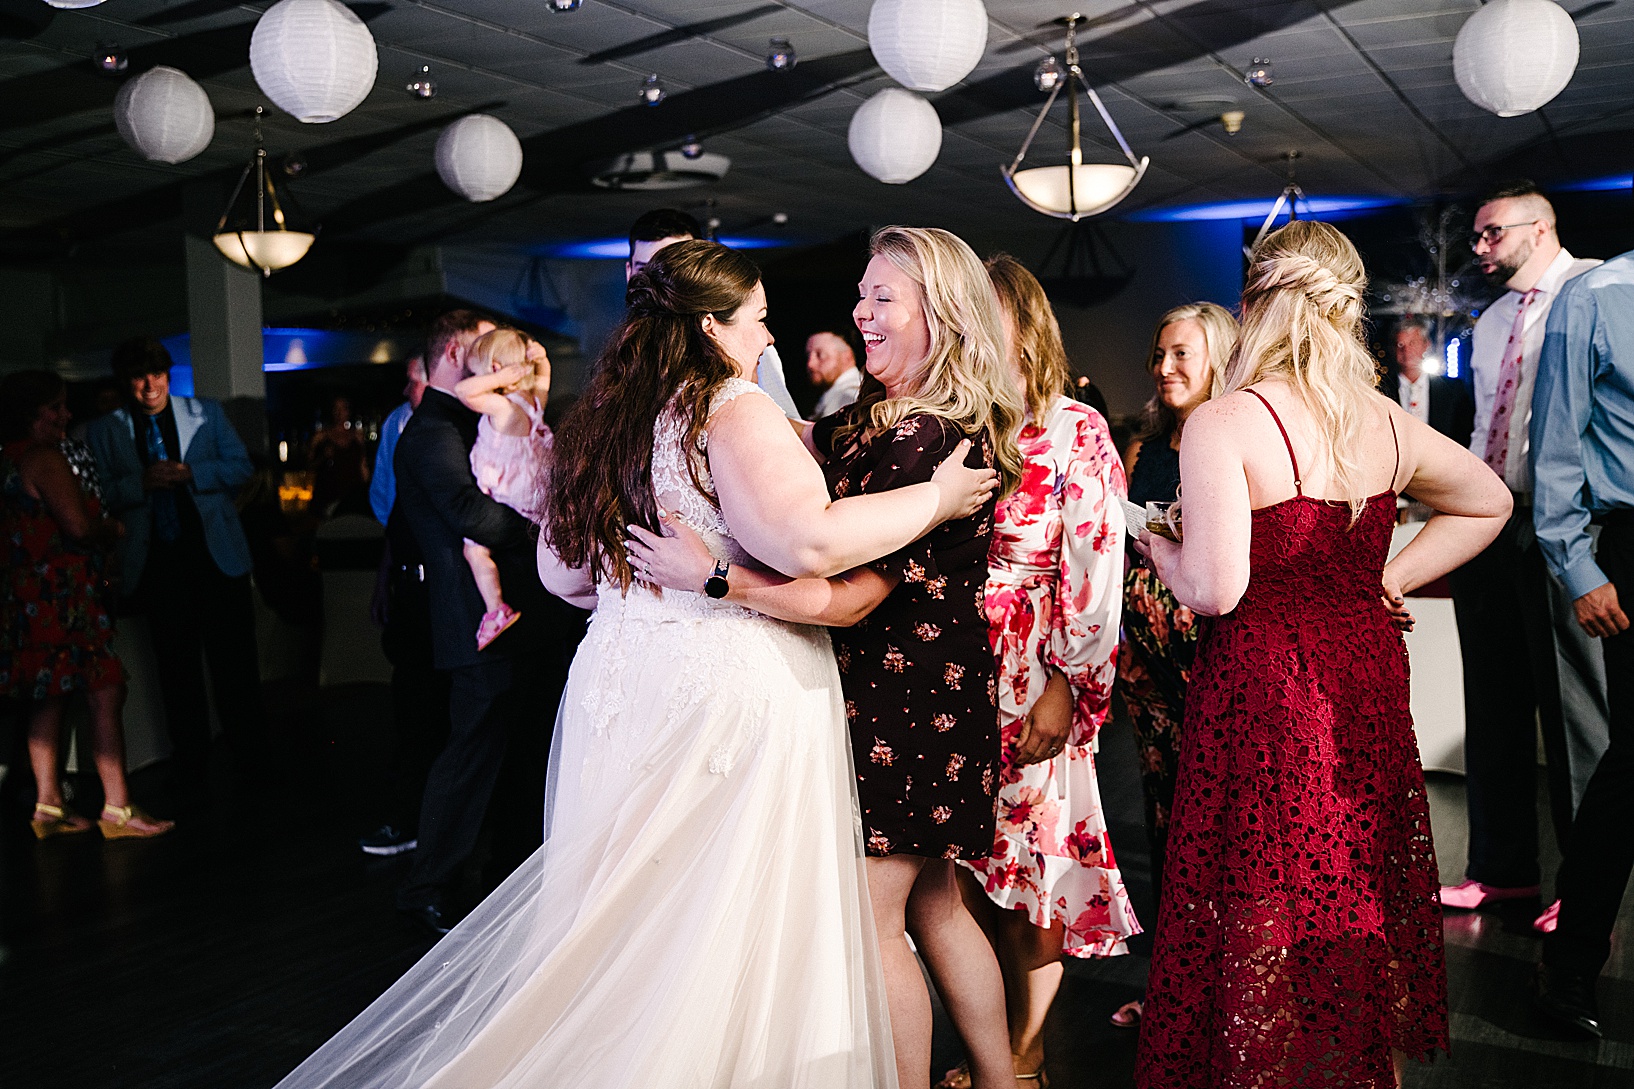 The bride dances with a woman on the dance floor of DiLucia's Banquet Hall during post wedding celebration